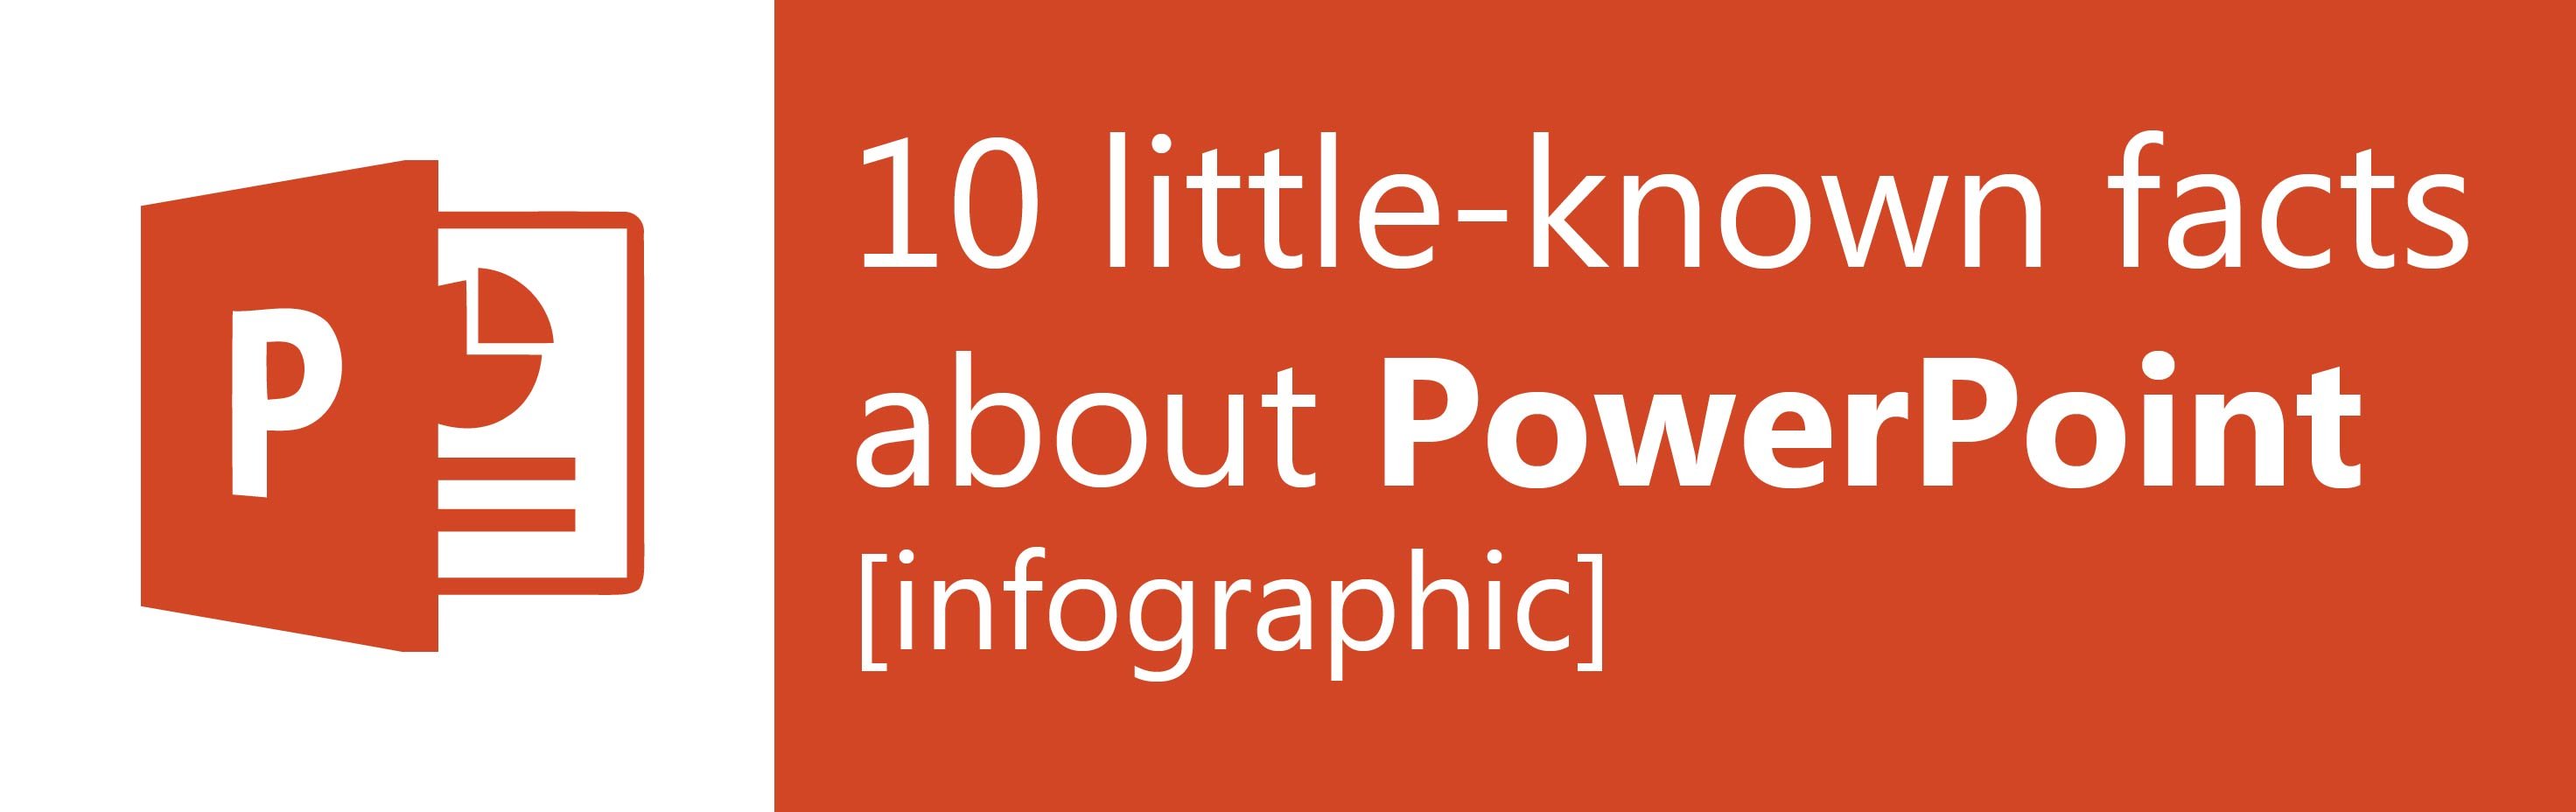 ppt-little-know-facts-title